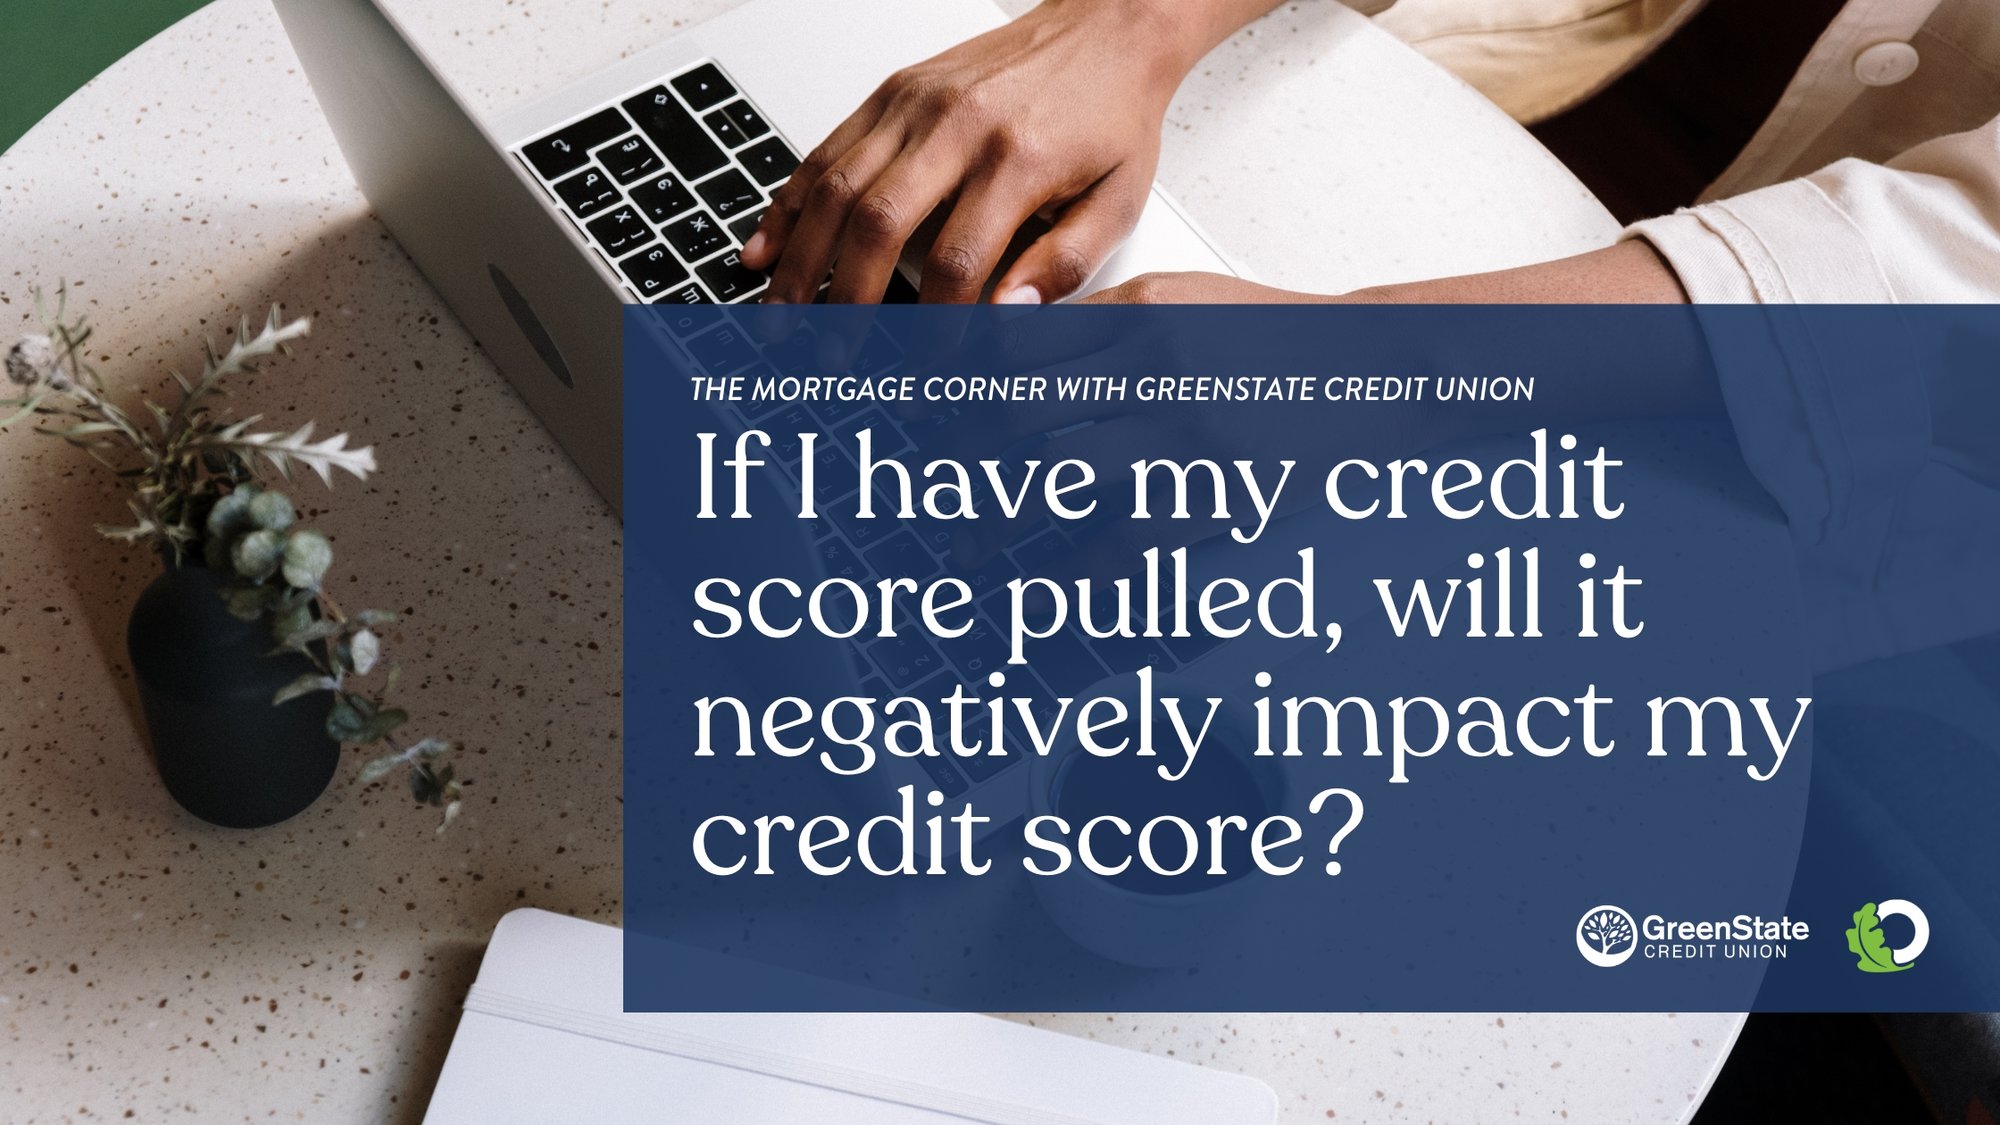 If I have my credit score pulled, will it negatively impact my credit score? 